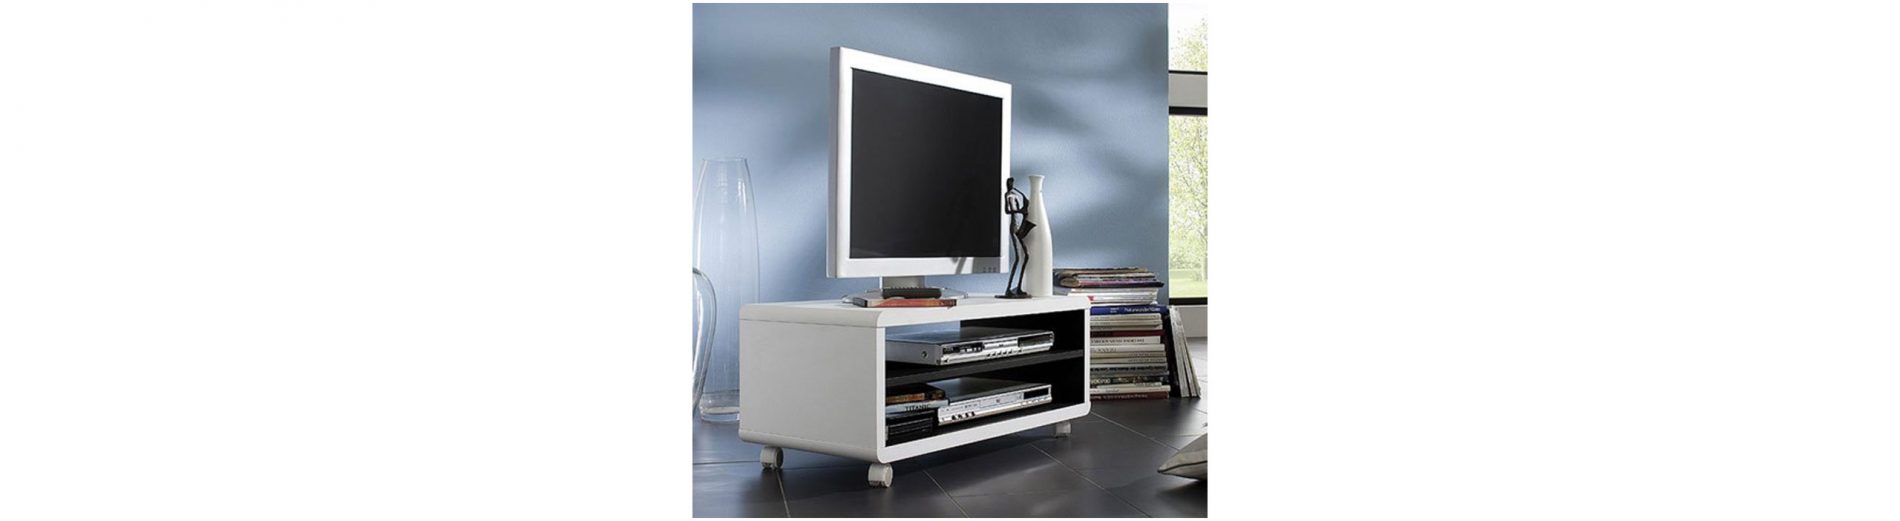 Sale On TV Stands For Flat Screens Shopping Tips